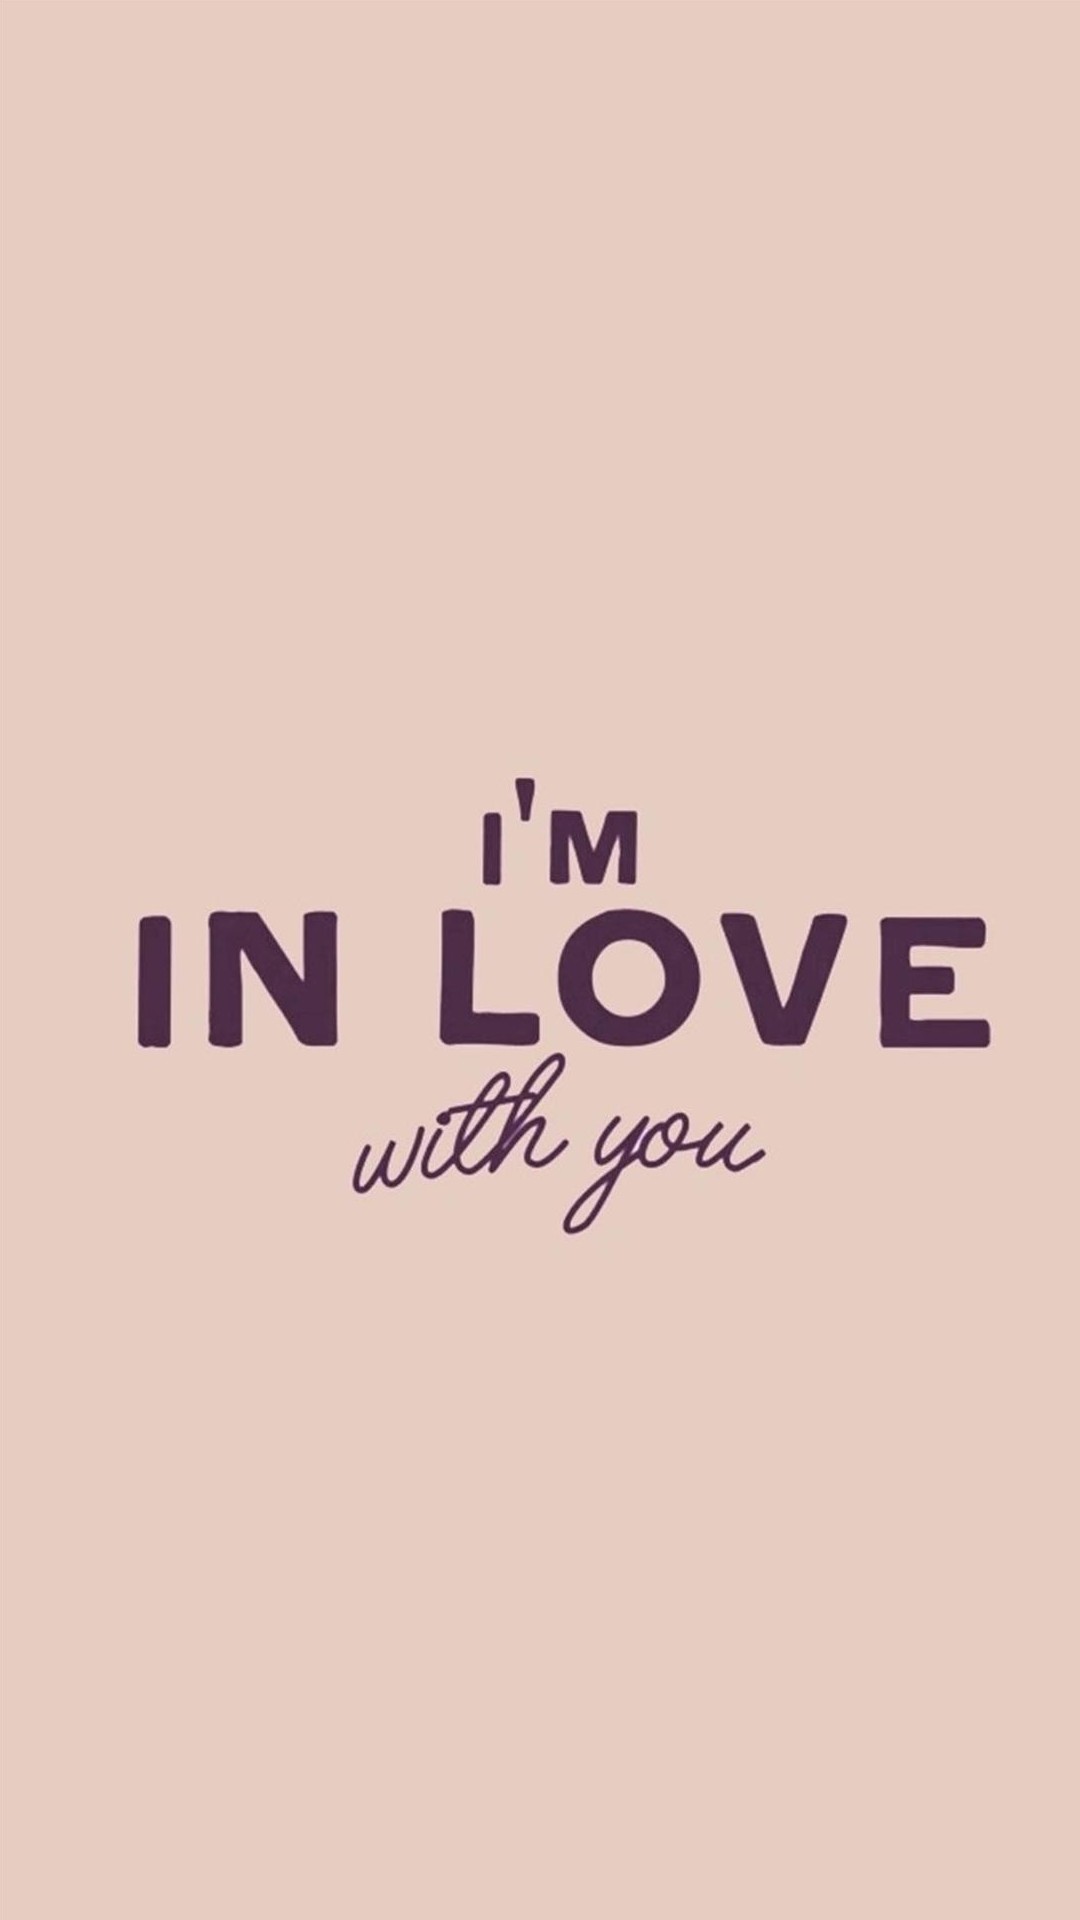 Iphone壁紙 I M In Love With You Loveメッセージ Iphone Wallpapers